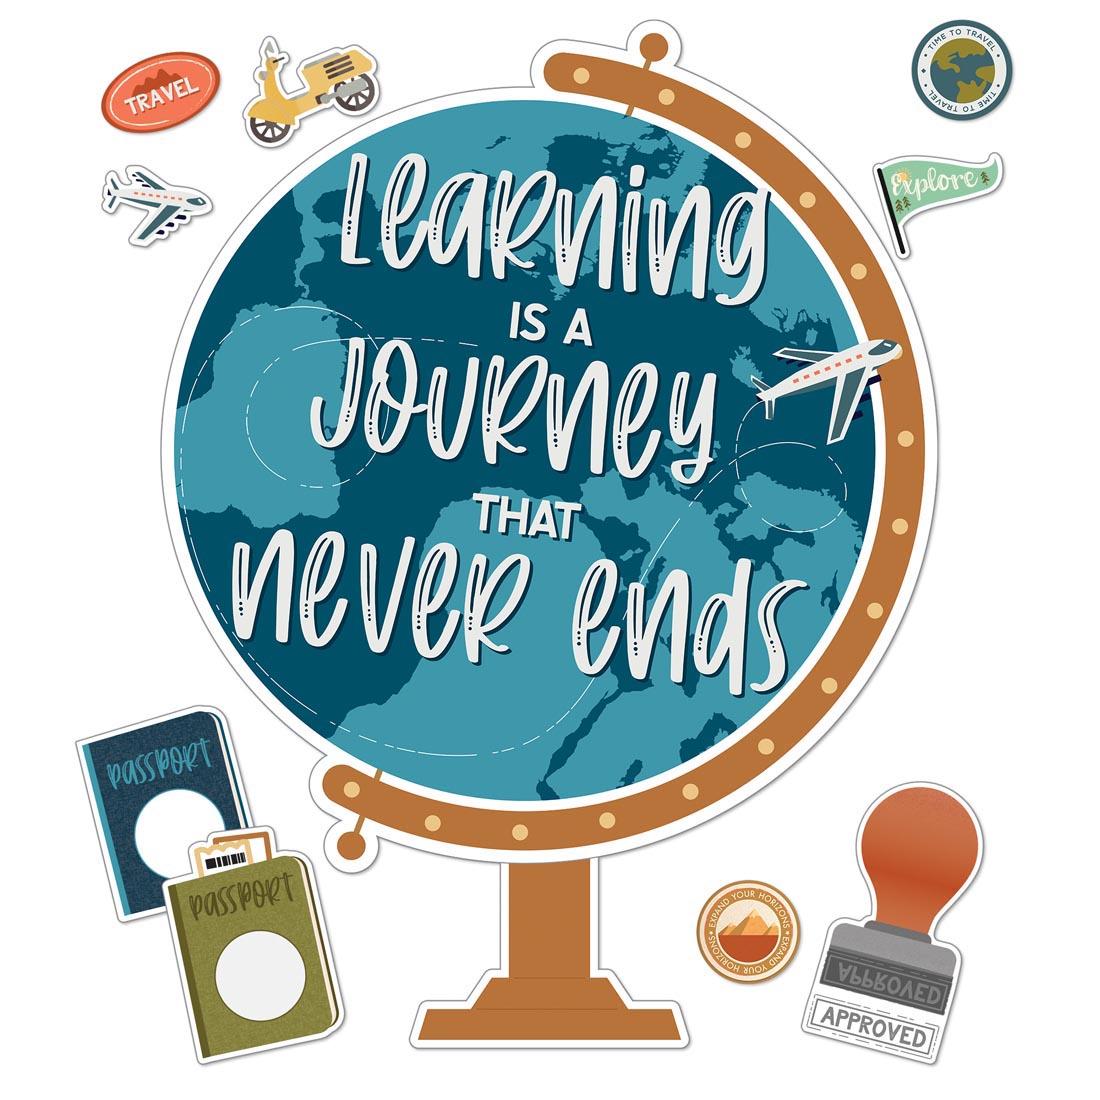 Main components of Let's Explore Learning Is a Journey Bulletin Board Set By Carson Dellosa, including large globe piece